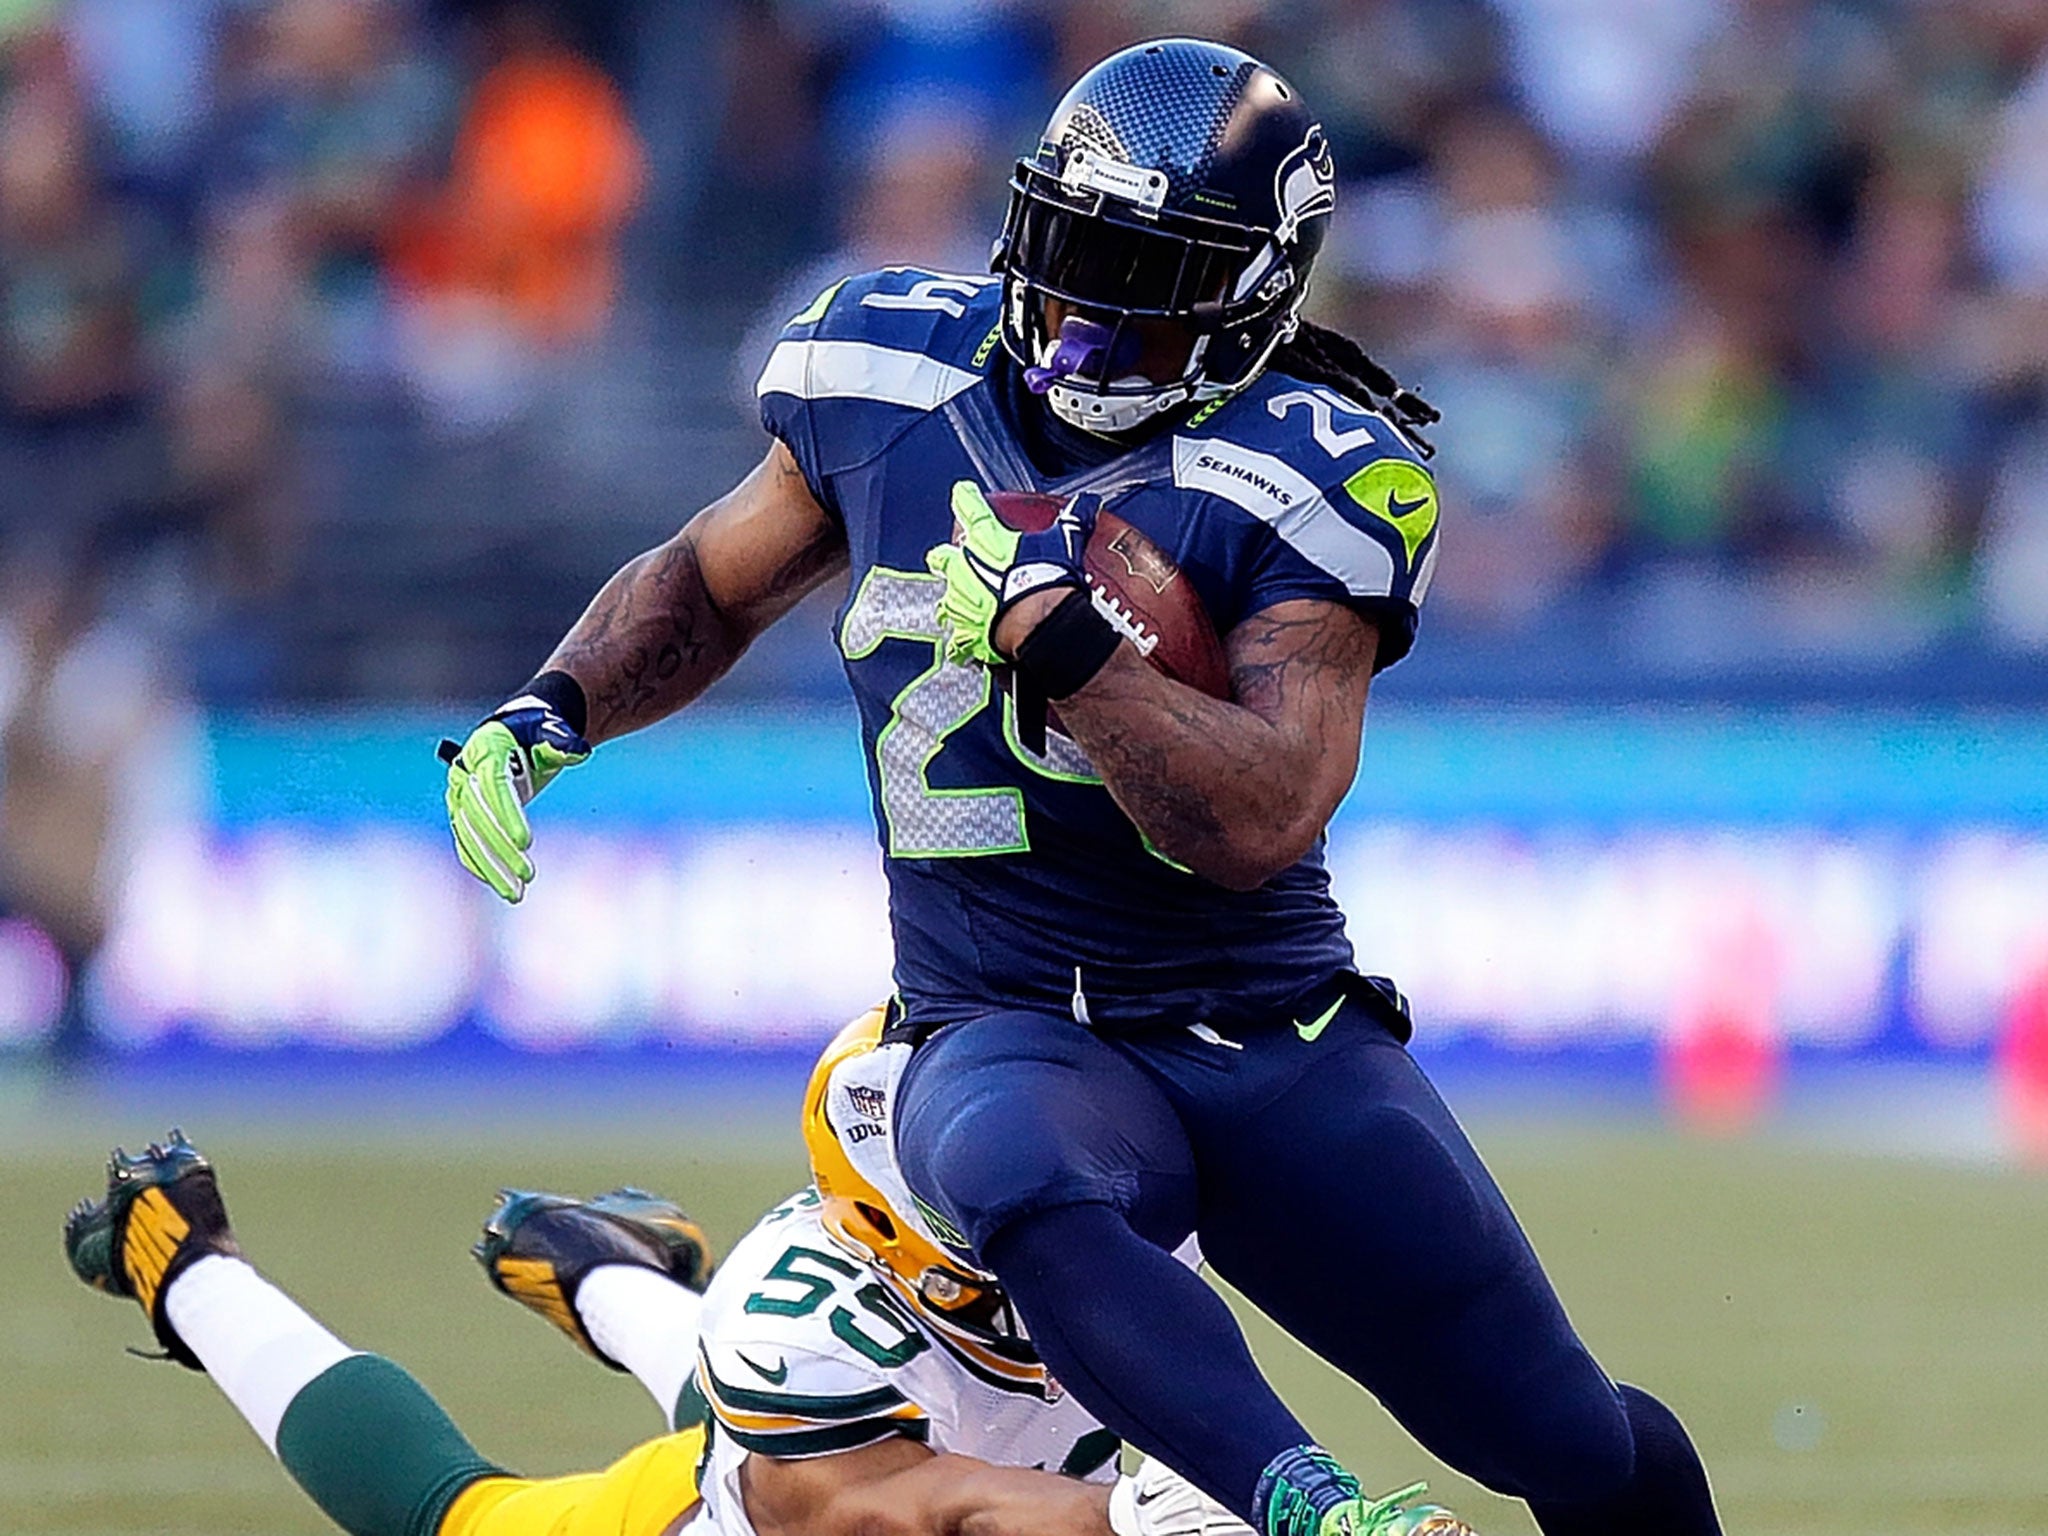 Seattle Seahawks’ running back Marshawn Lynch avoids the tackle of Brad Jones in the reigning champions’ 36-16 defeat of the Green Bay Packers on Thursday